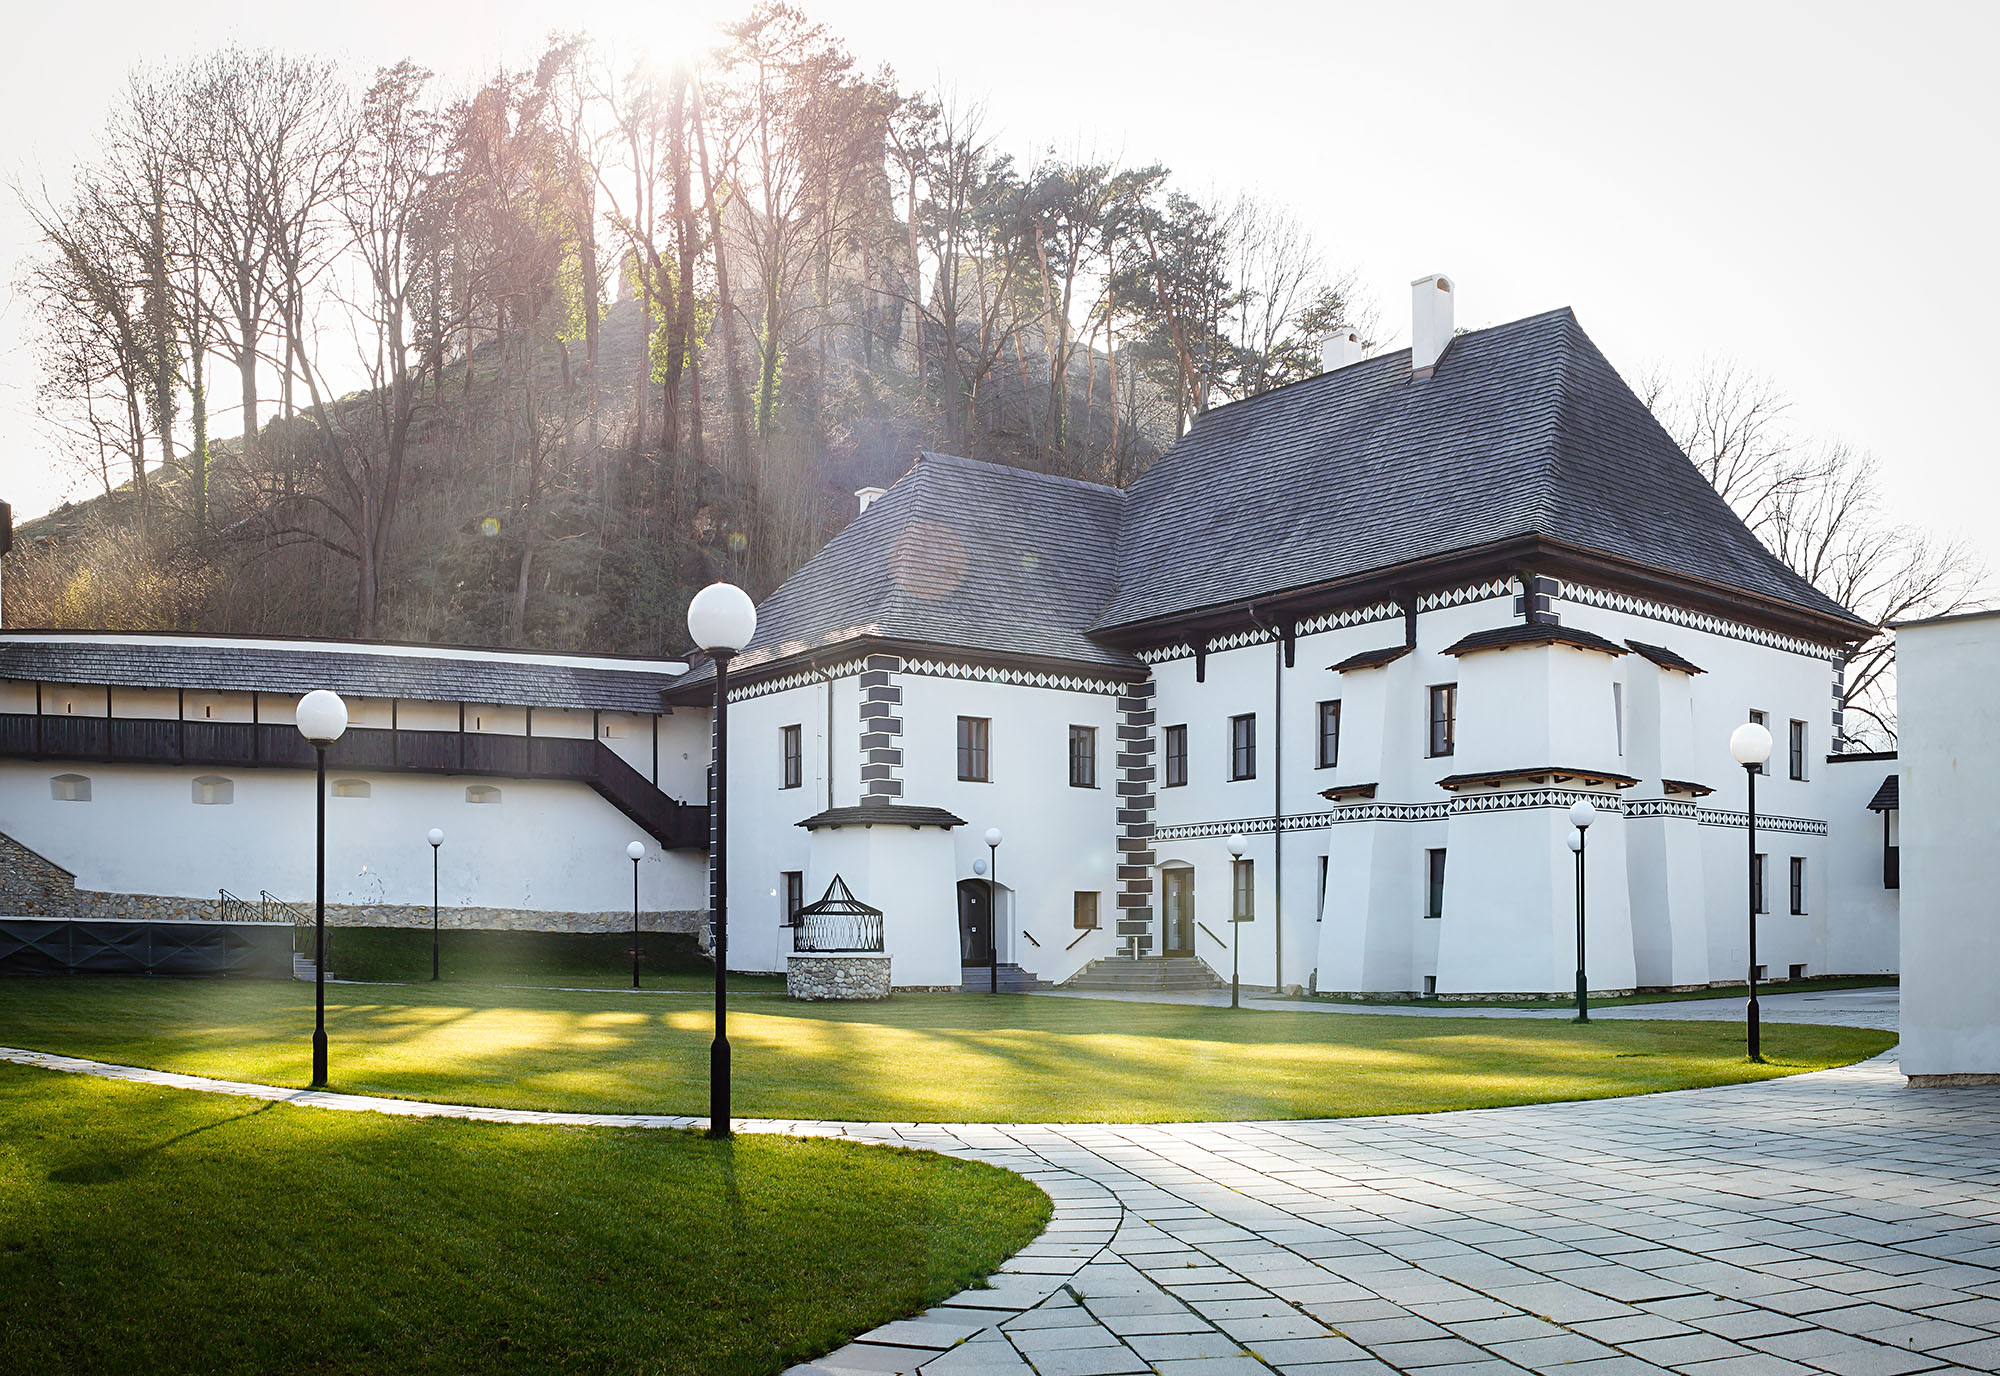 The Zichy's Mansion in Divín. Phot.: OSSKP Divín, Copyright: Government Office of the Slovak Republic